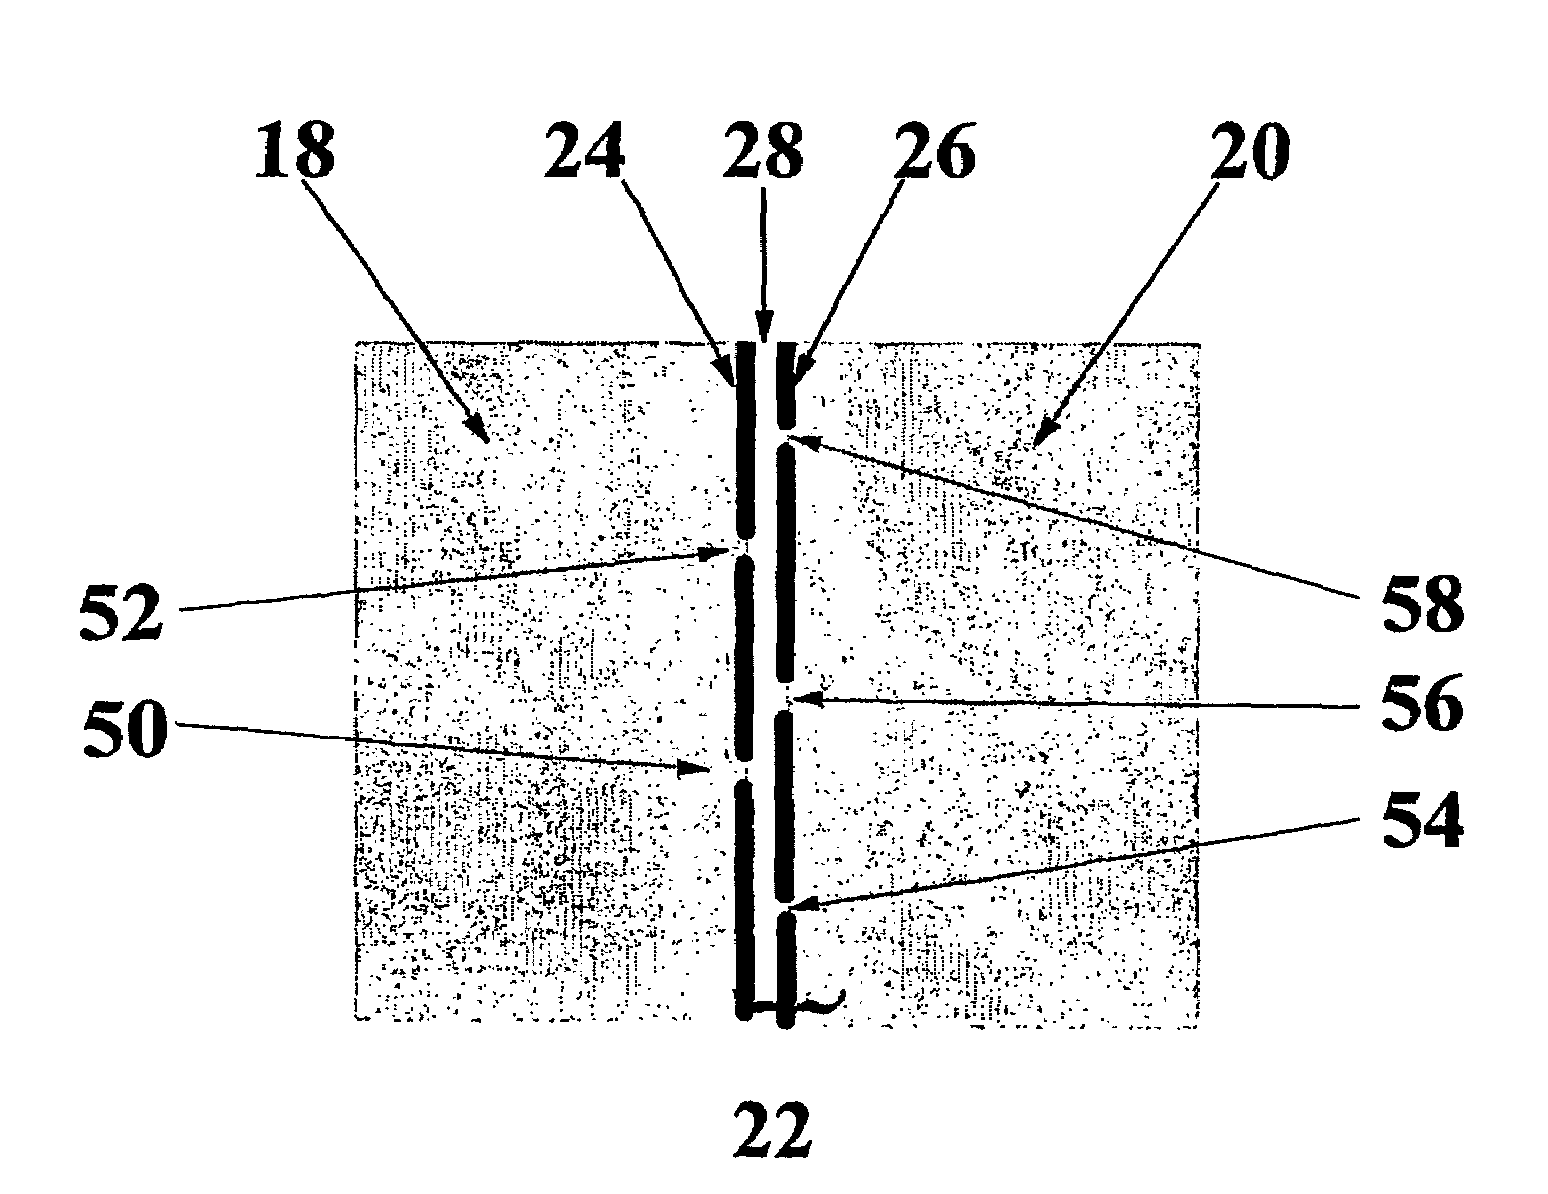 Transparent support for organic light emitting device